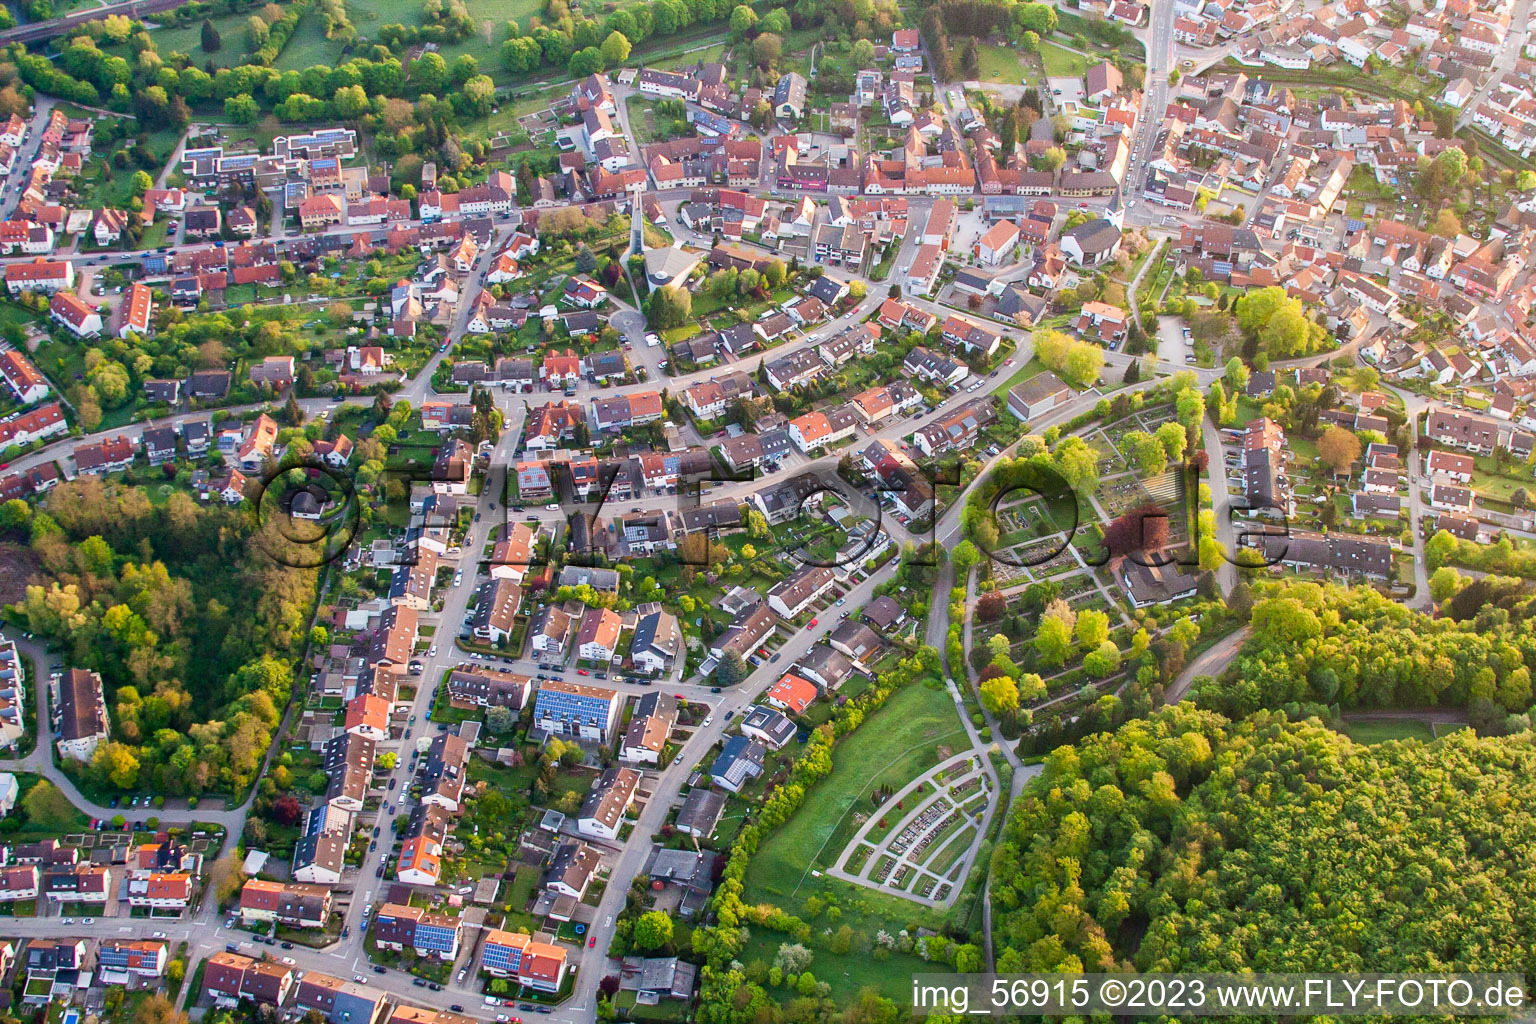 Lindenstr in the district Berghausen in Pfinztal in the state Baden-Wuerttemberg, Germany